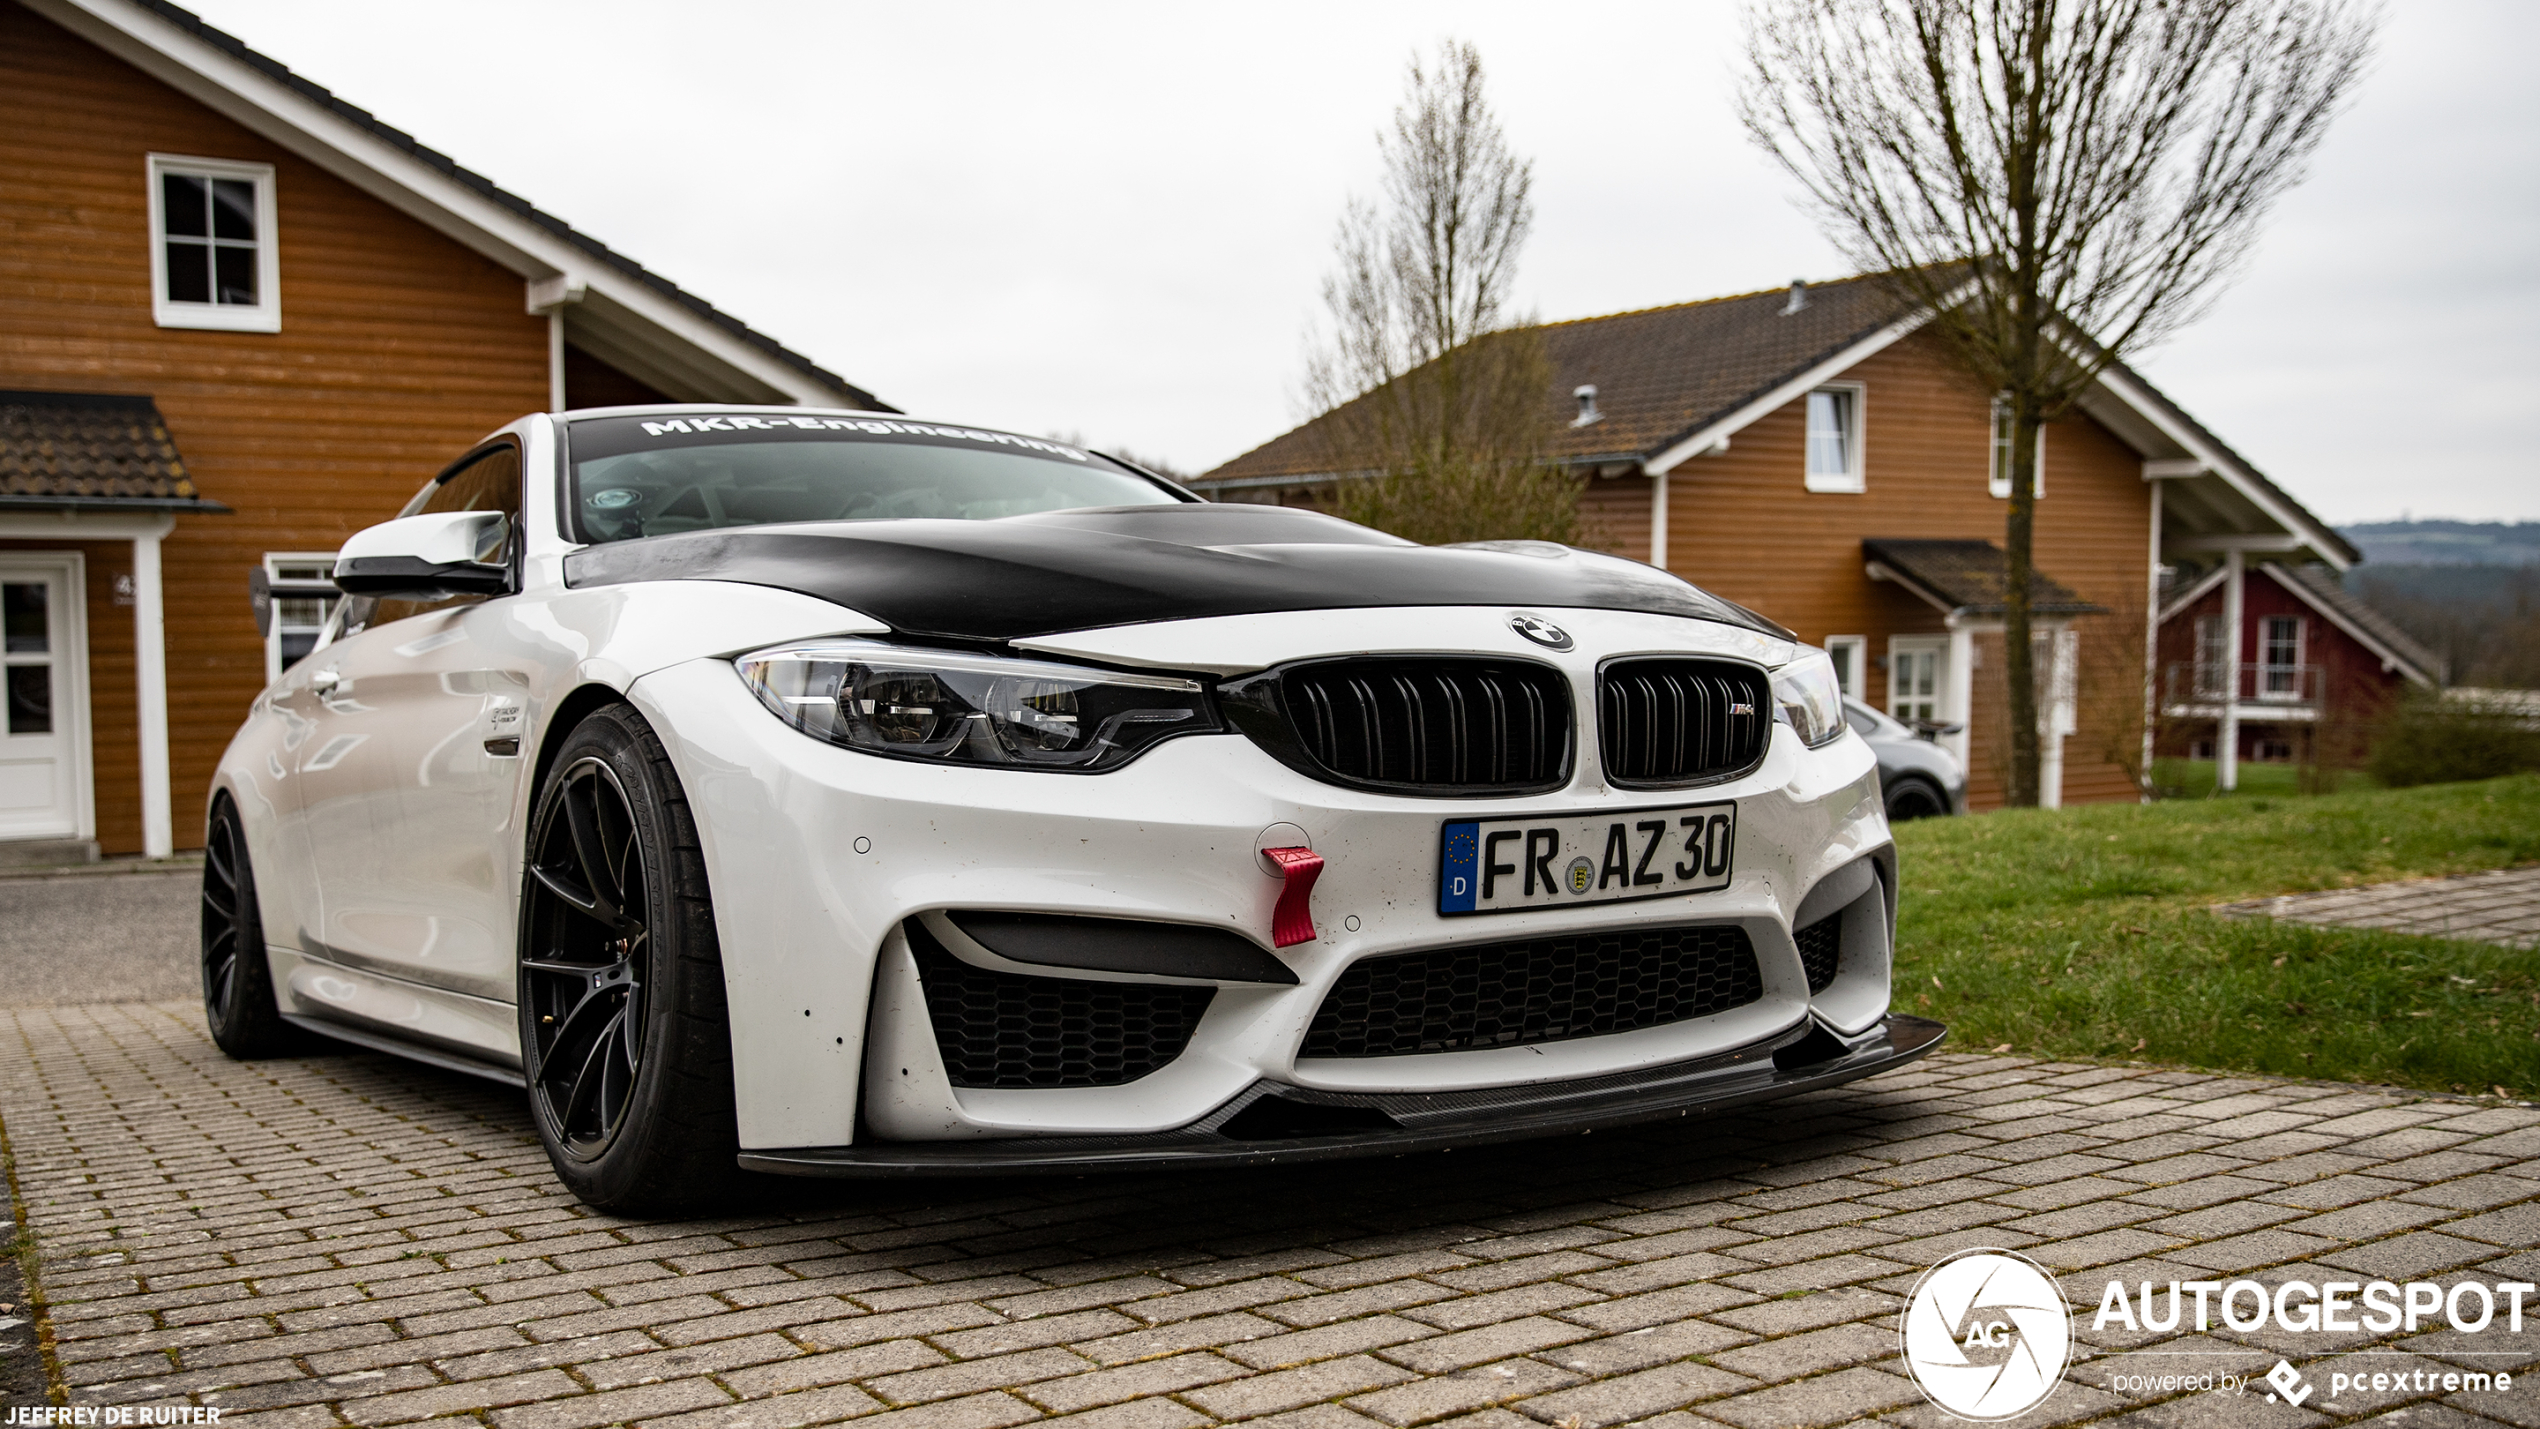 BMW M4 F82 Coupé MKR Engineering